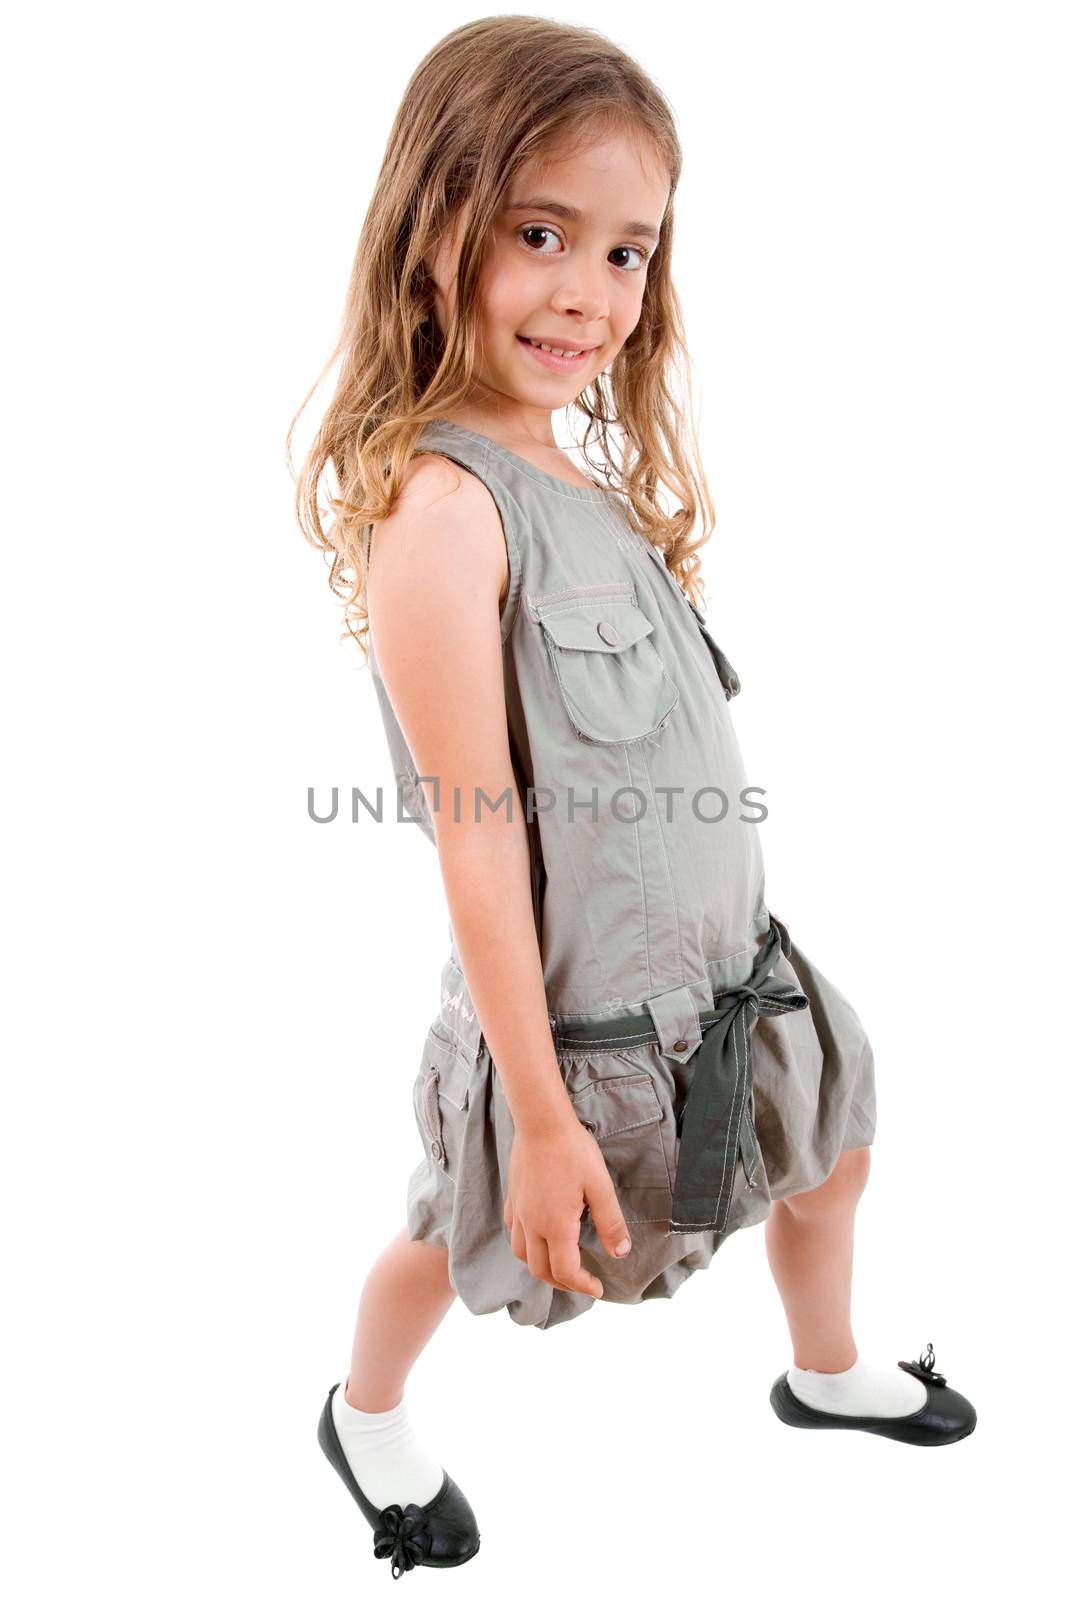 young happy girl full body, isolated on white